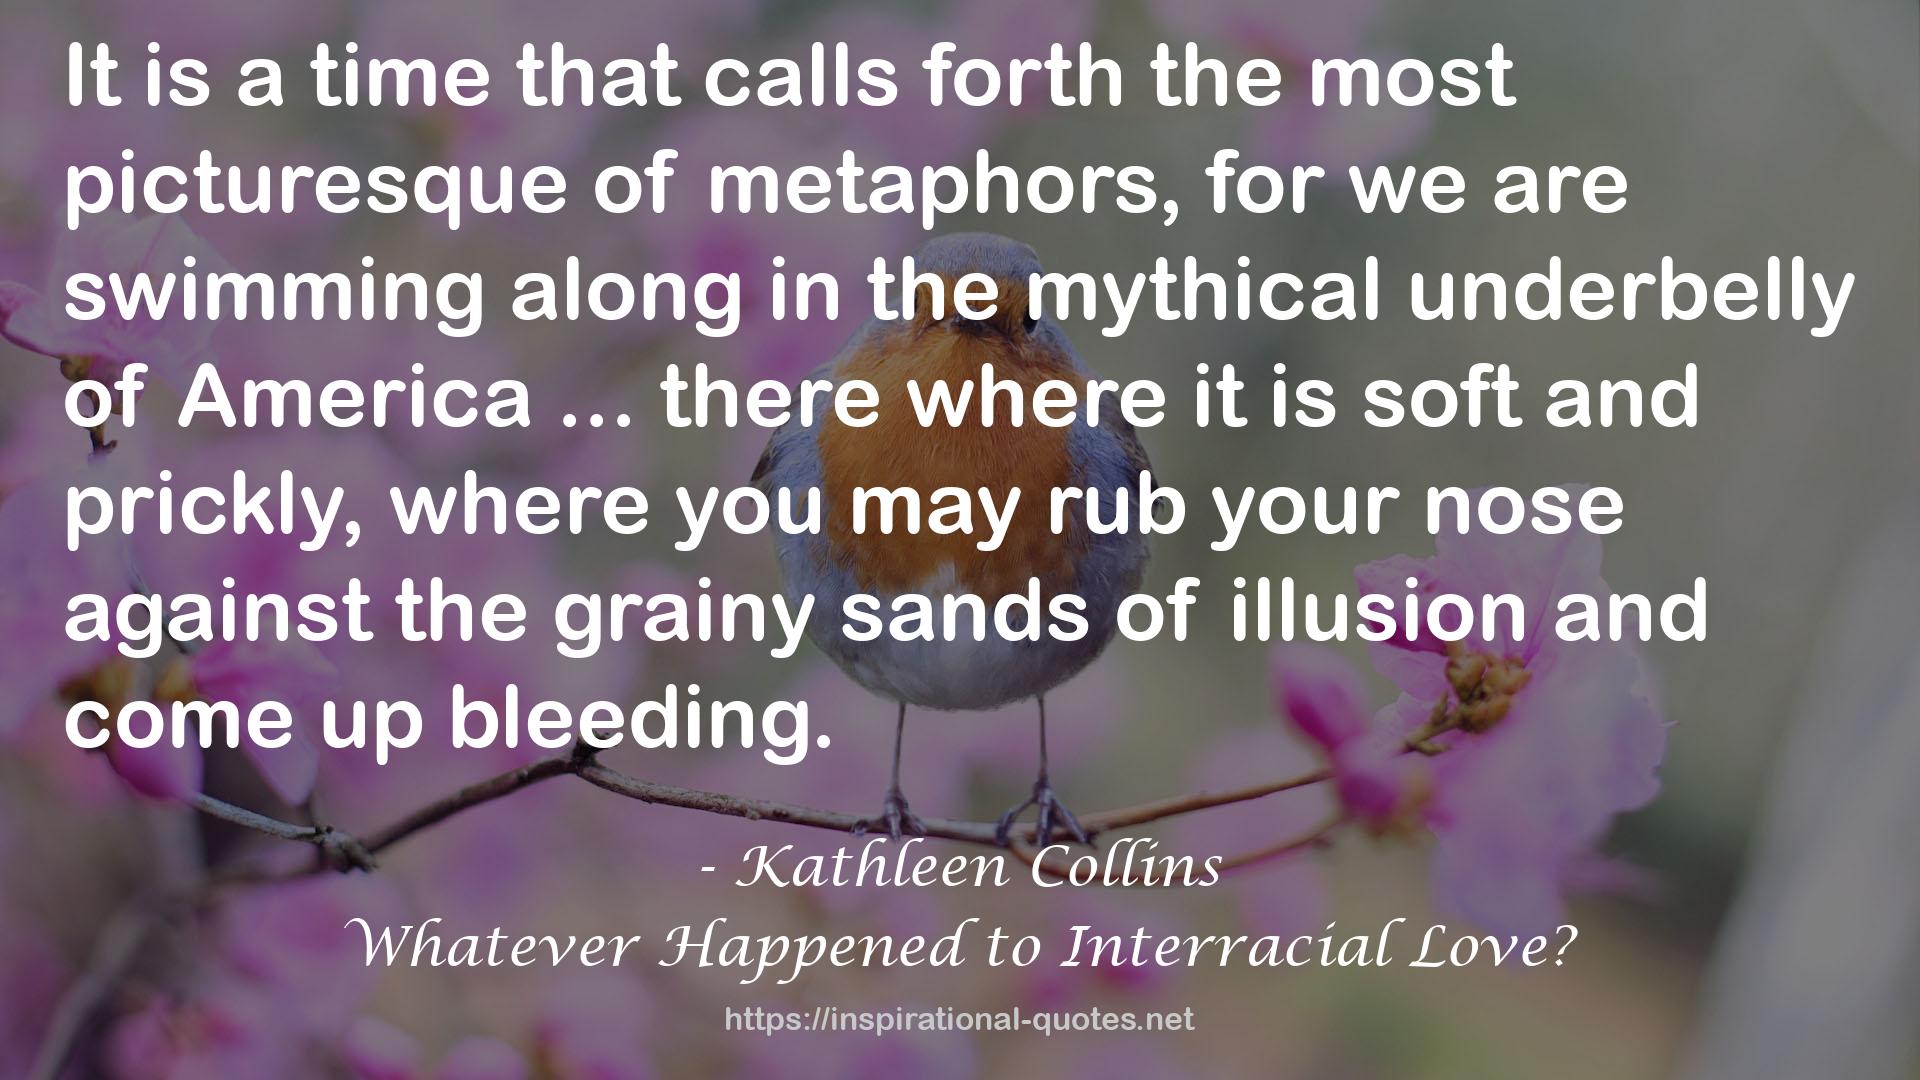 Whatever Happened to Interracial Love? QUOTES